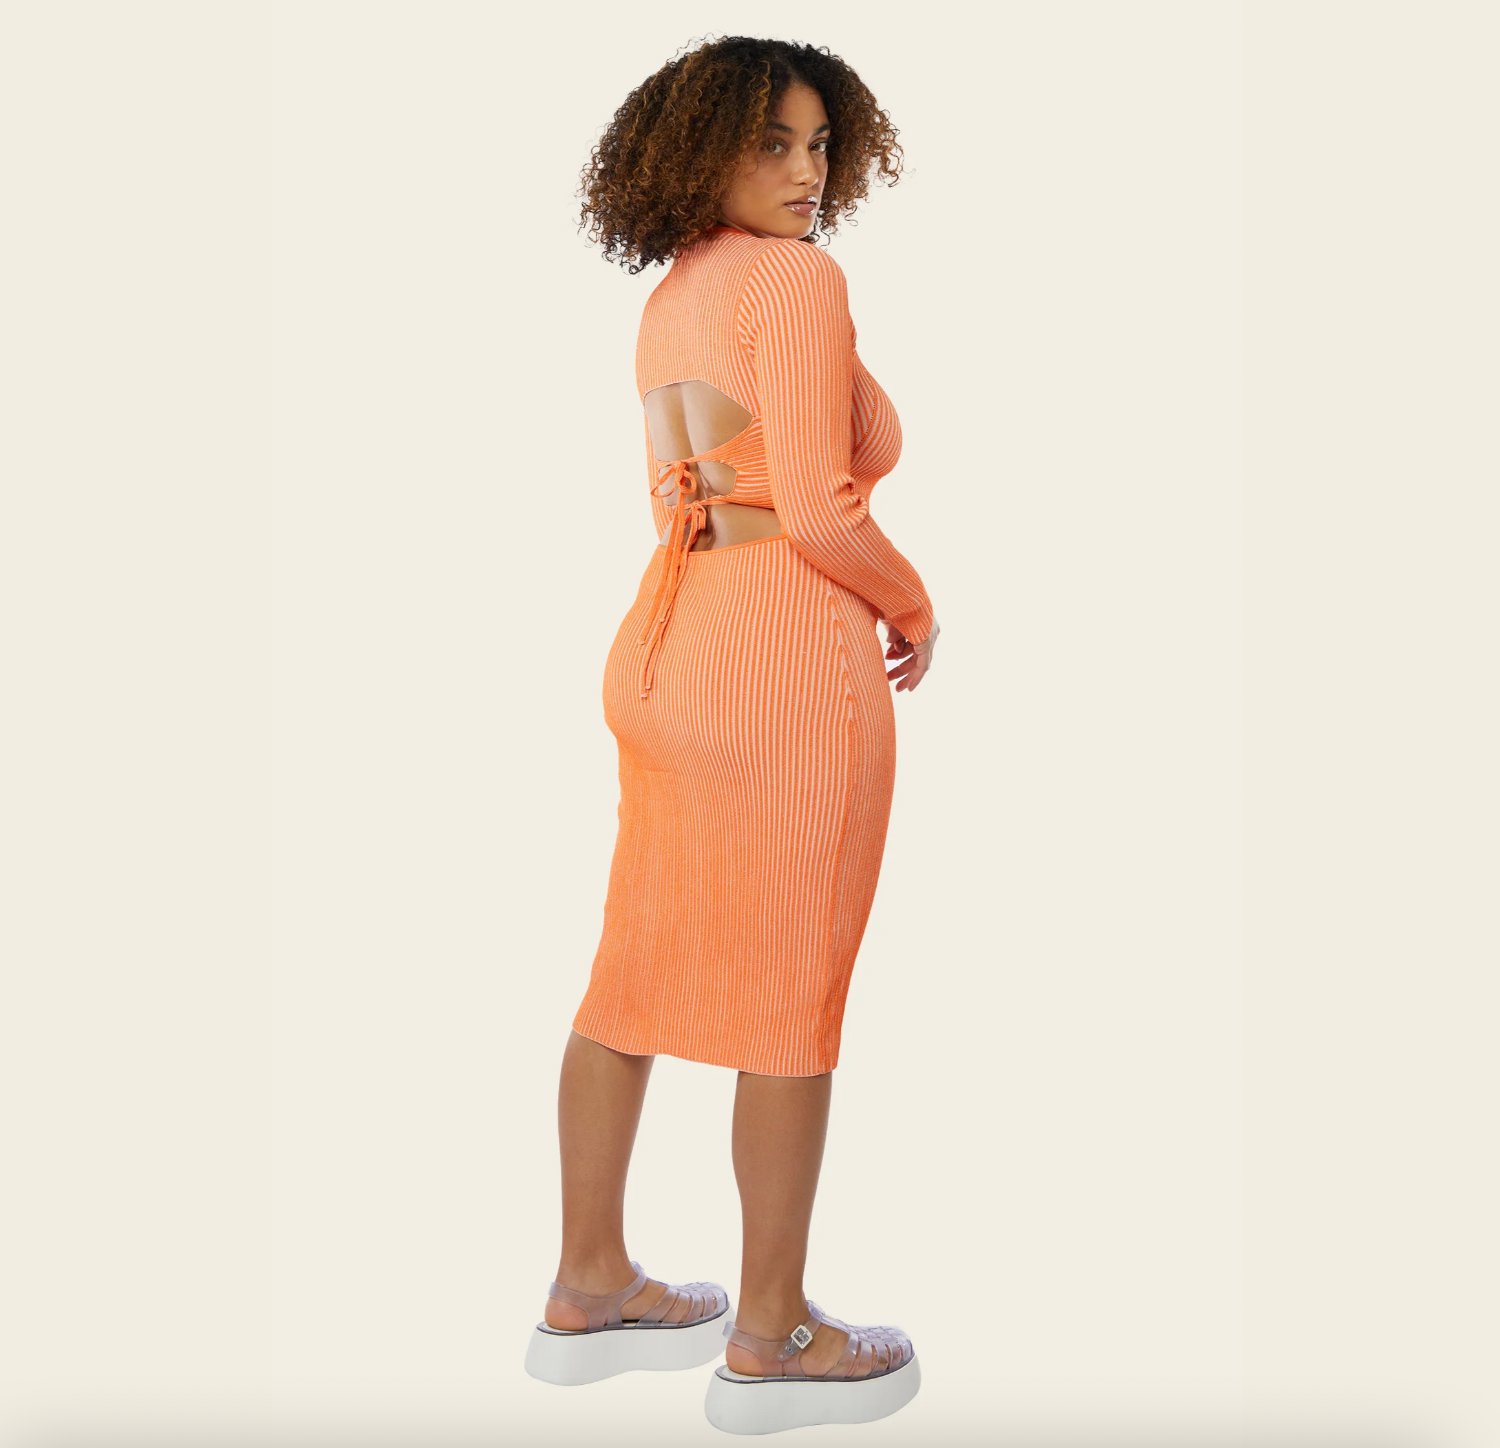 Product Image for Ophelia Knit Dress, Peach